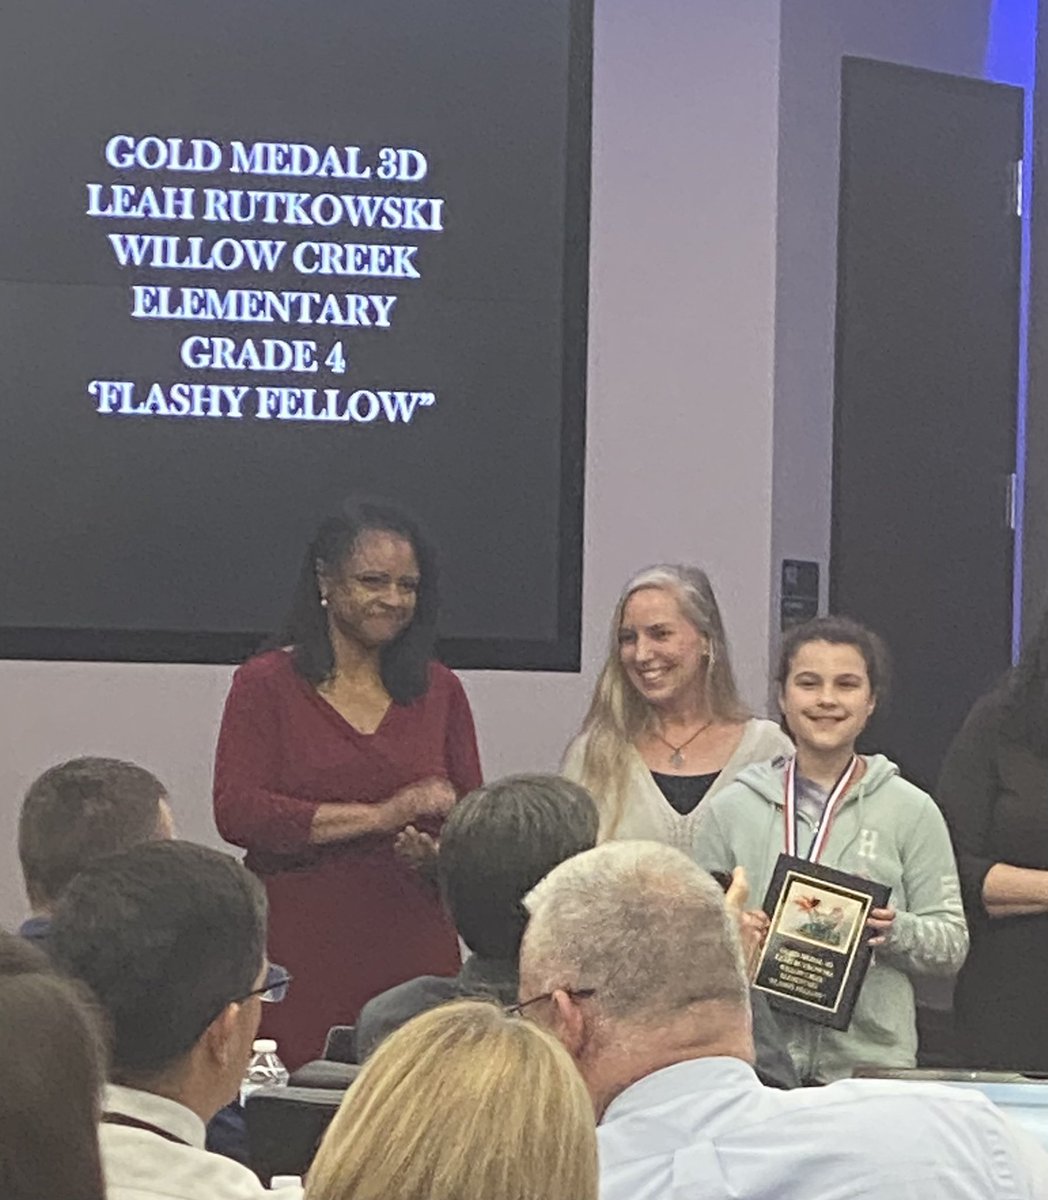 It was such an honor to stand with these Cardinal artists as they were recognized at the Humble ISD board meeting for their Rodeo Art! #bestofshow #goldmedal @HumbleISD_WCE @VisualArtHumble @JHadley_AP